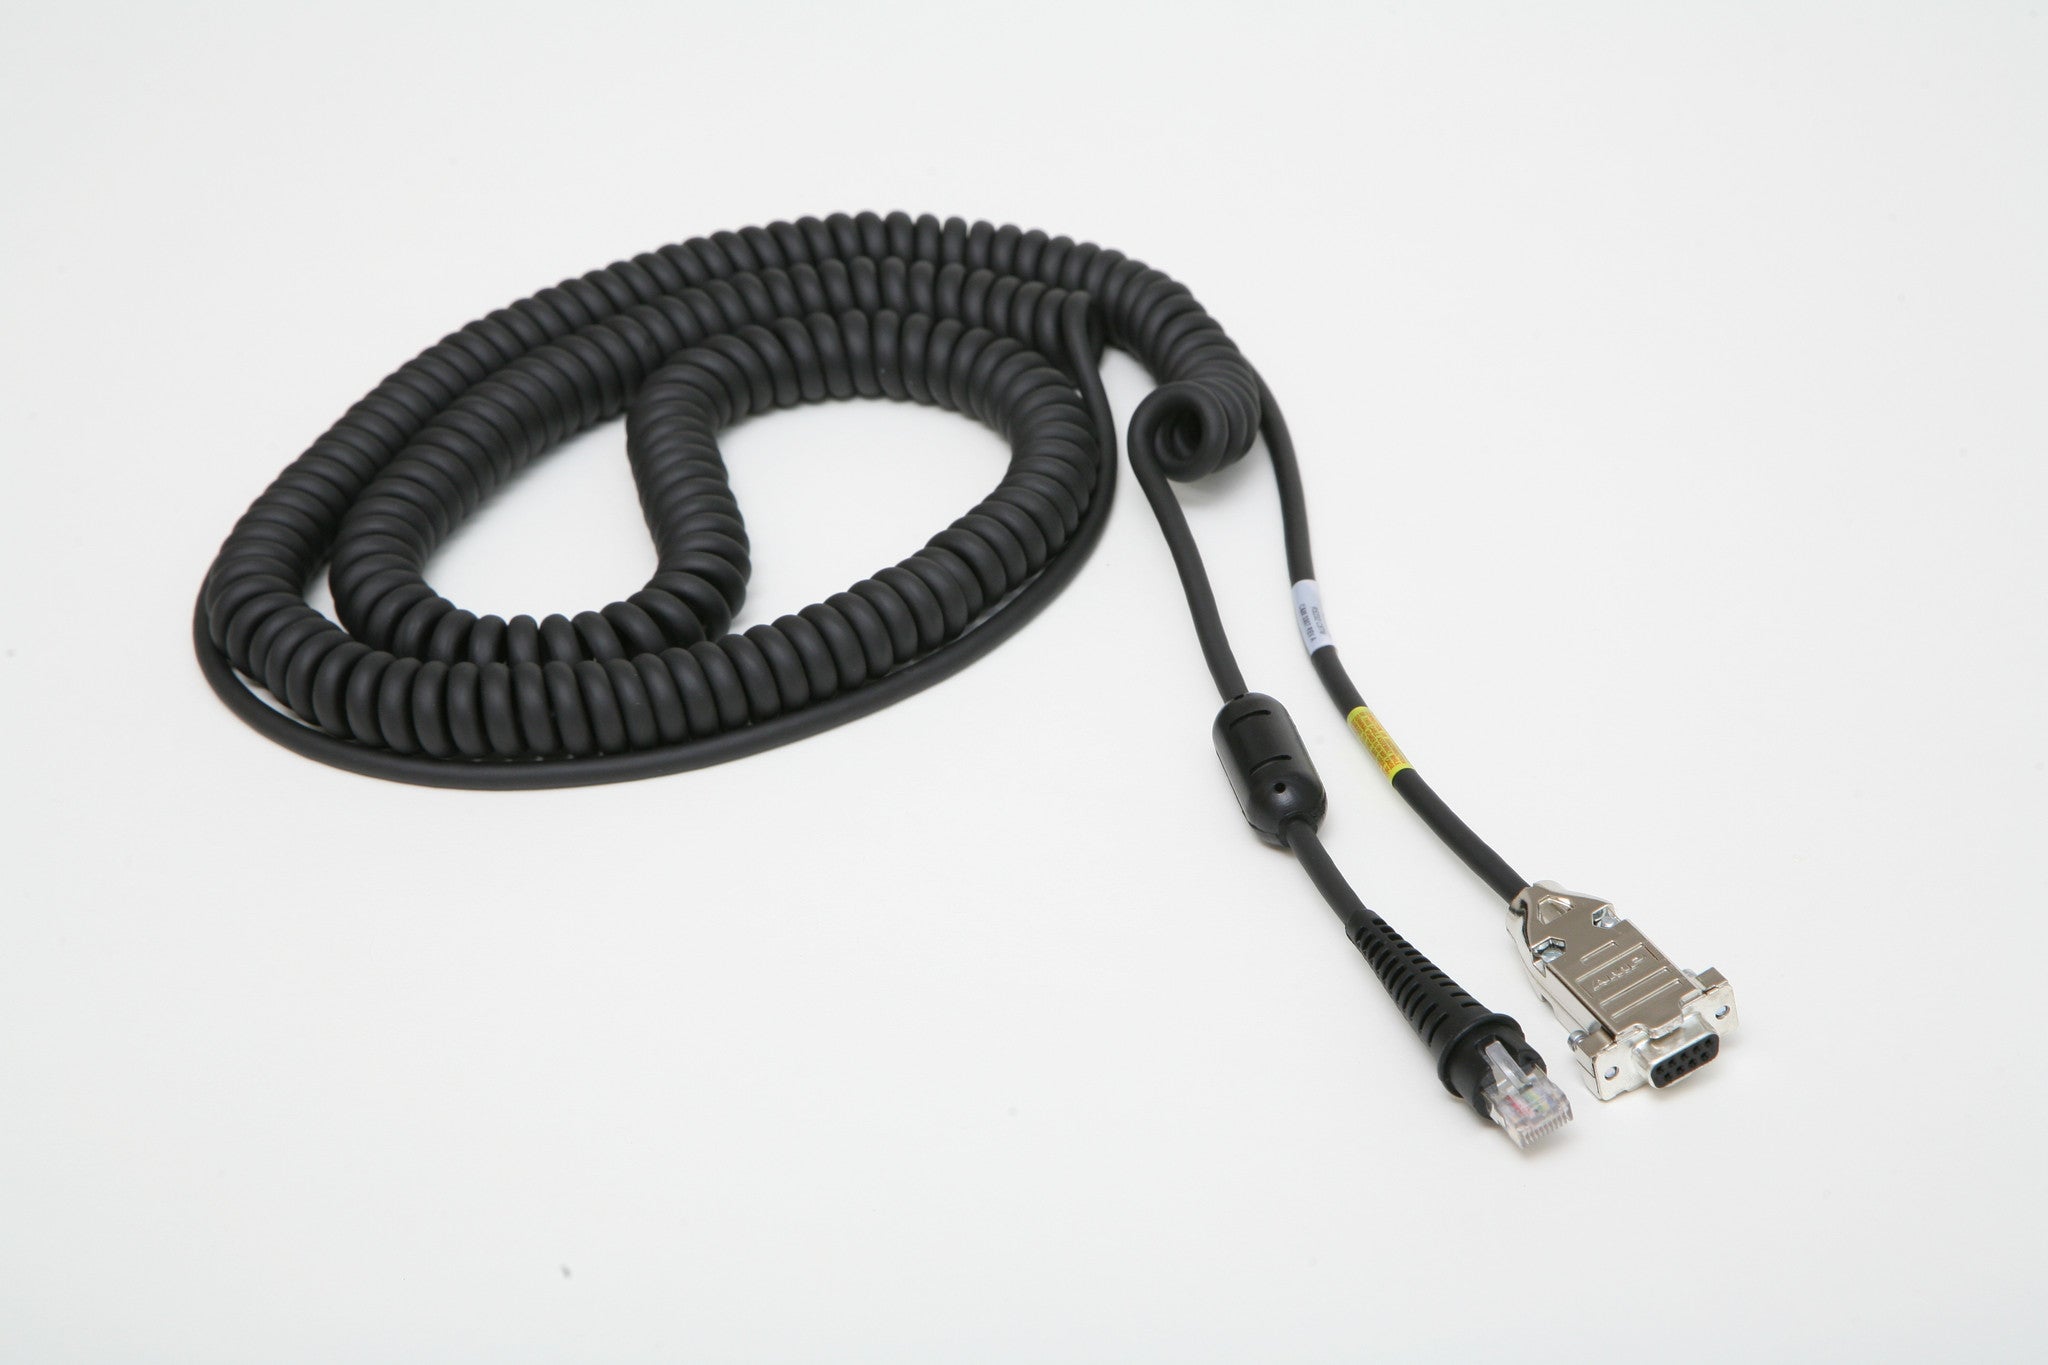 WORLDWIDE BAR CODE SCANNER CABLE P.N. 700-0410, 42206261-01 RS 232 SERIAL CABLE